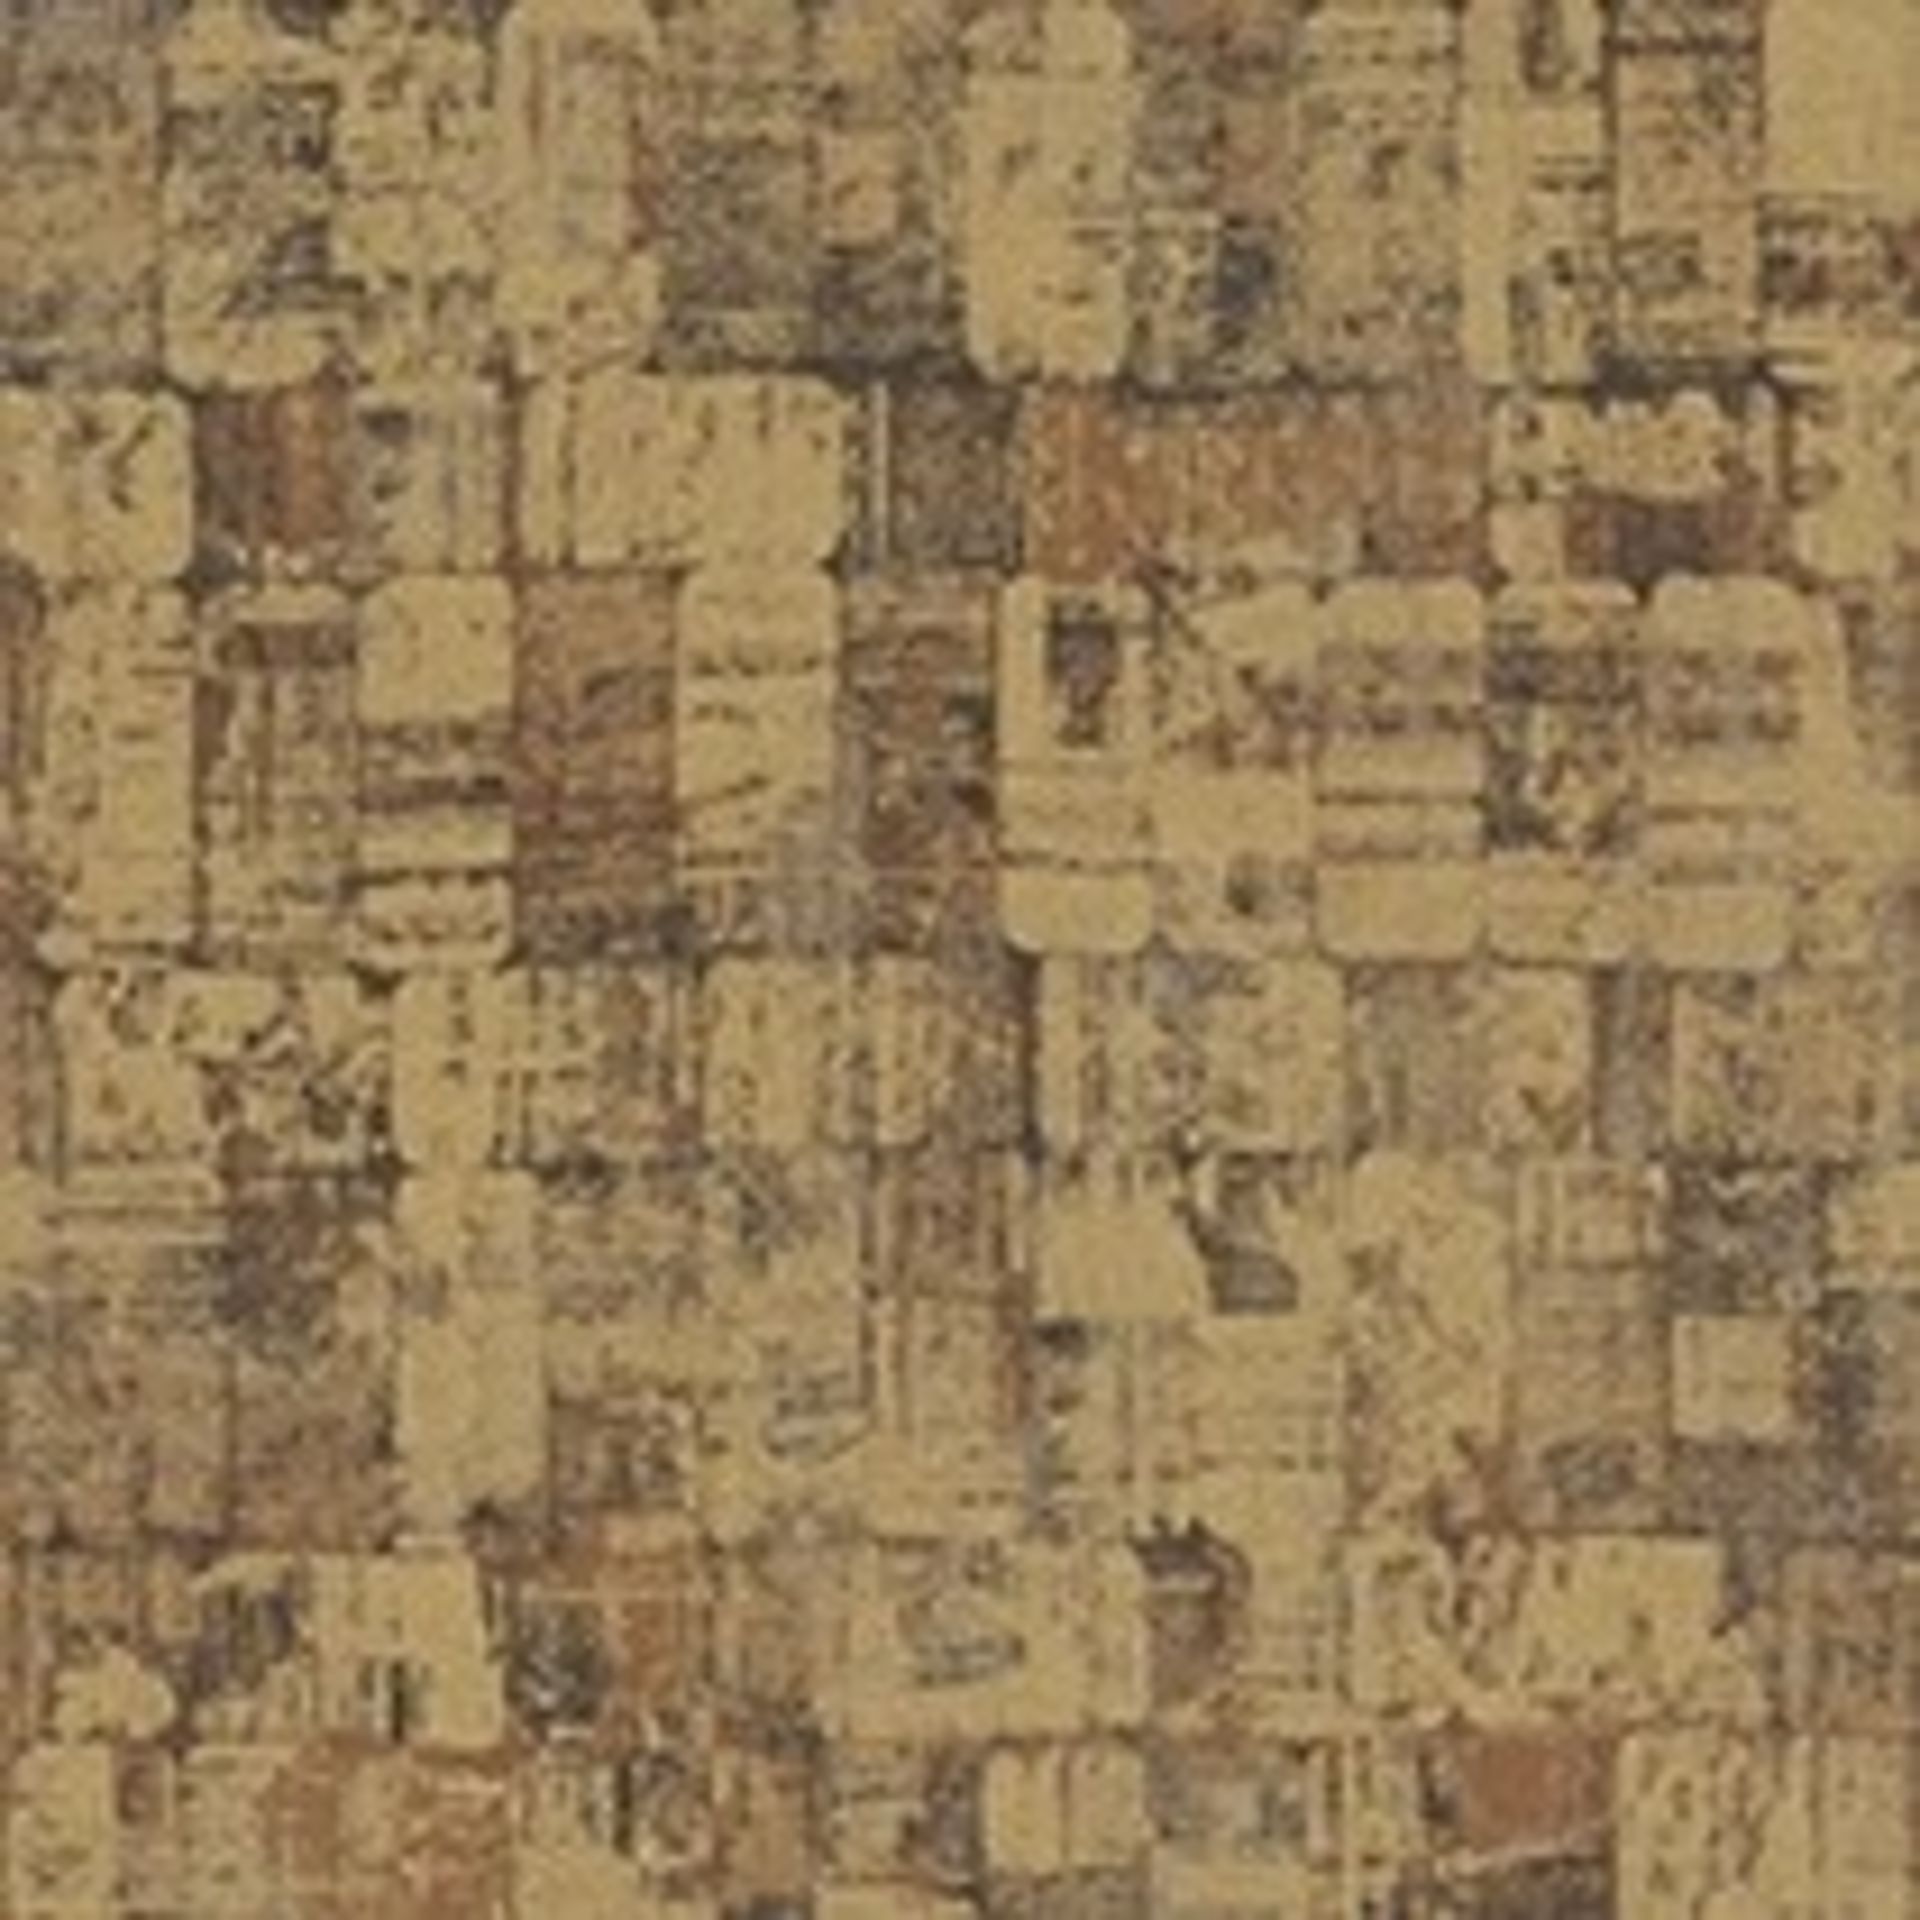 65 Rolls of Zanzibar Wallpaper (Bays 1607 – 1623) (Library Images – Some Colours May Not Be - Image 5 of 23